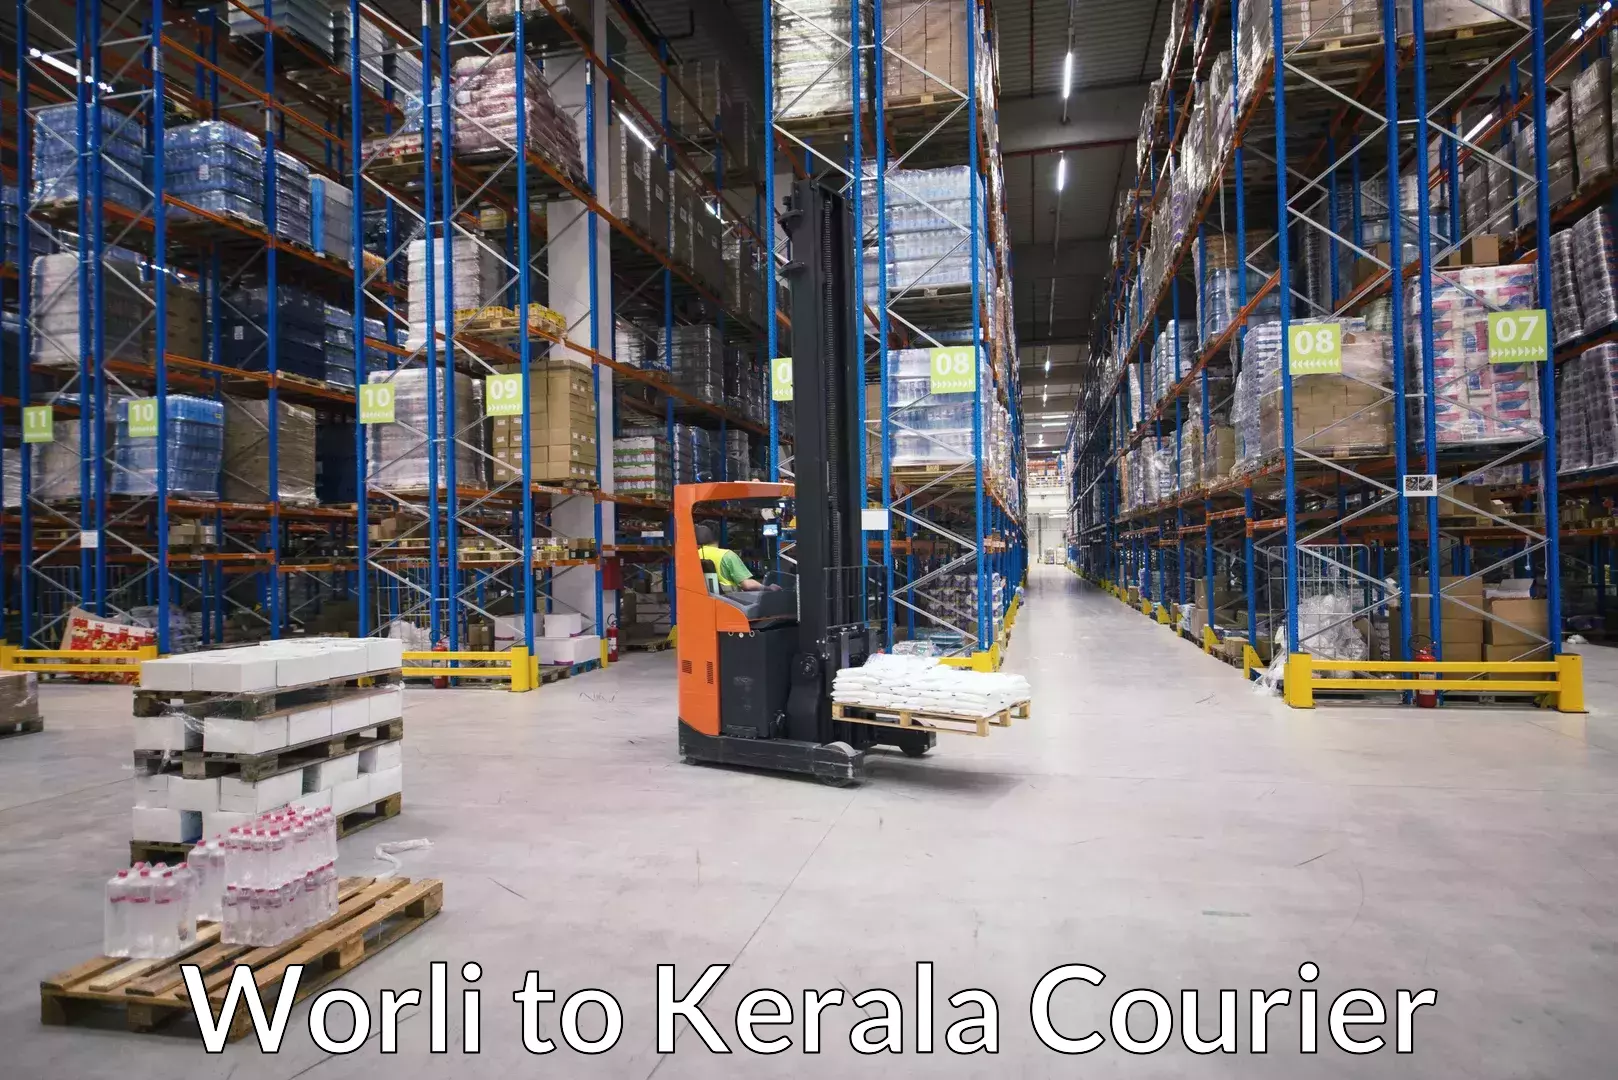 Luggage delivery system Worli to Kerala